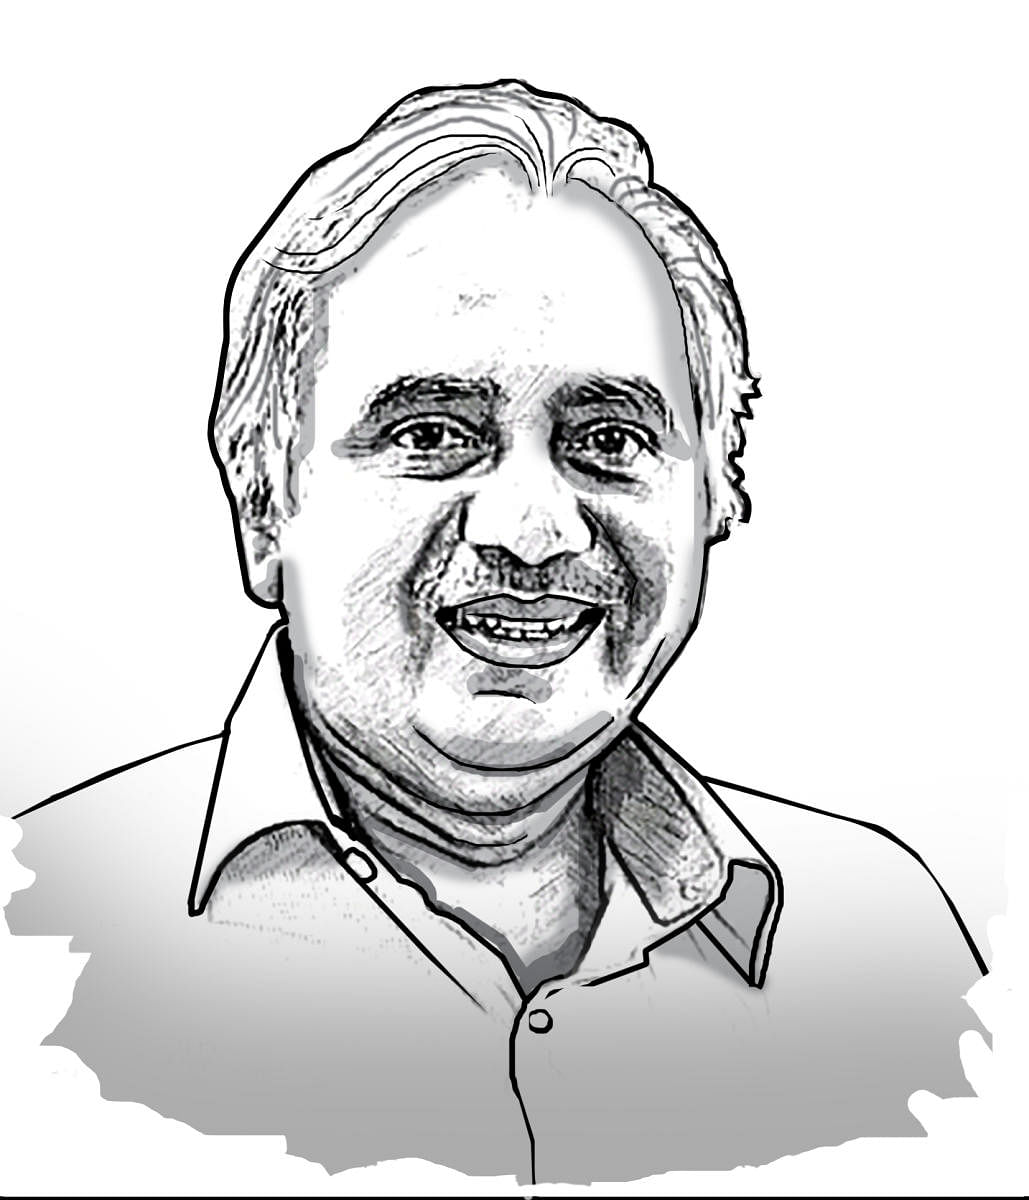 Seshadri Chari reads between the lines on big national and international developments from his vantage point in the BJP National Executive and the RSS